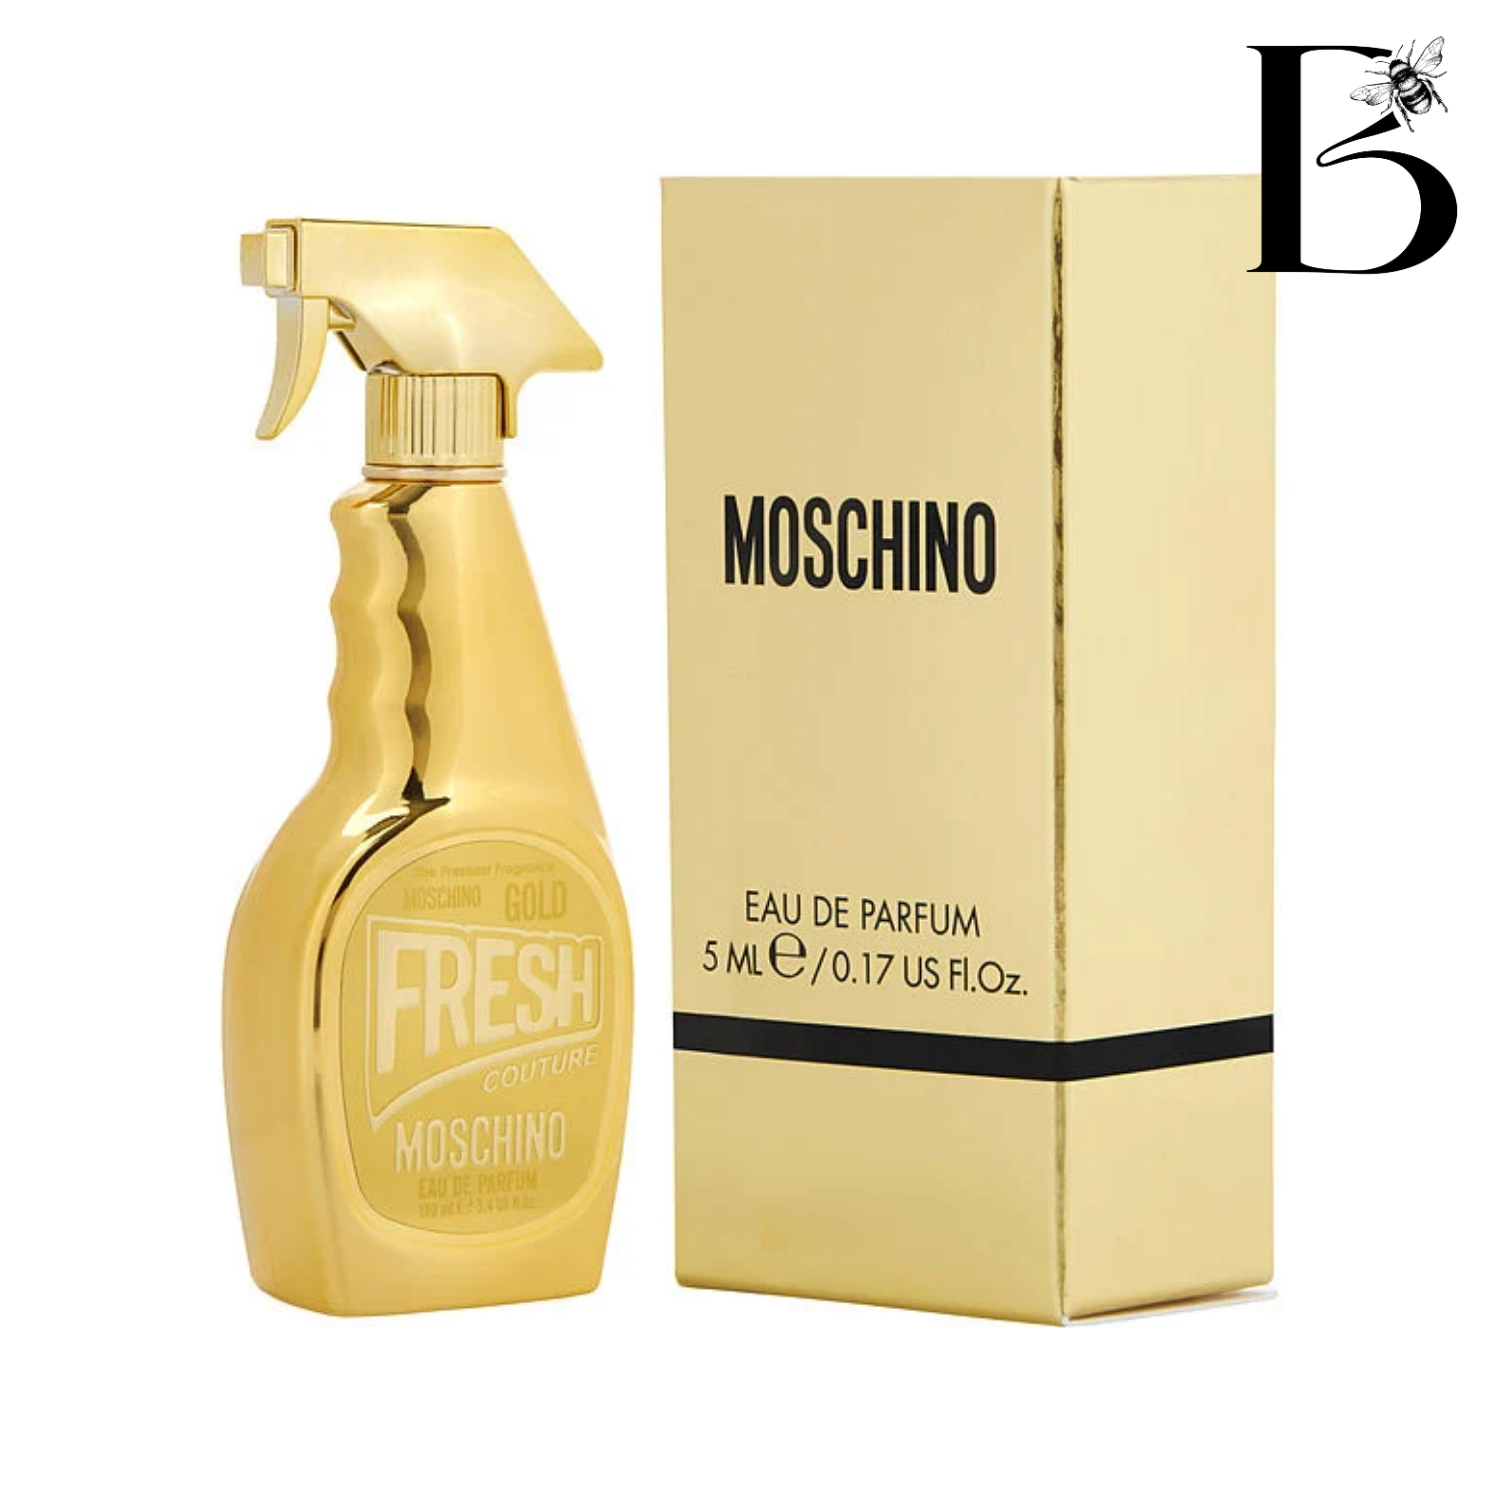 MOSCHINO GOLD FRESH COUTURE – Black Bee